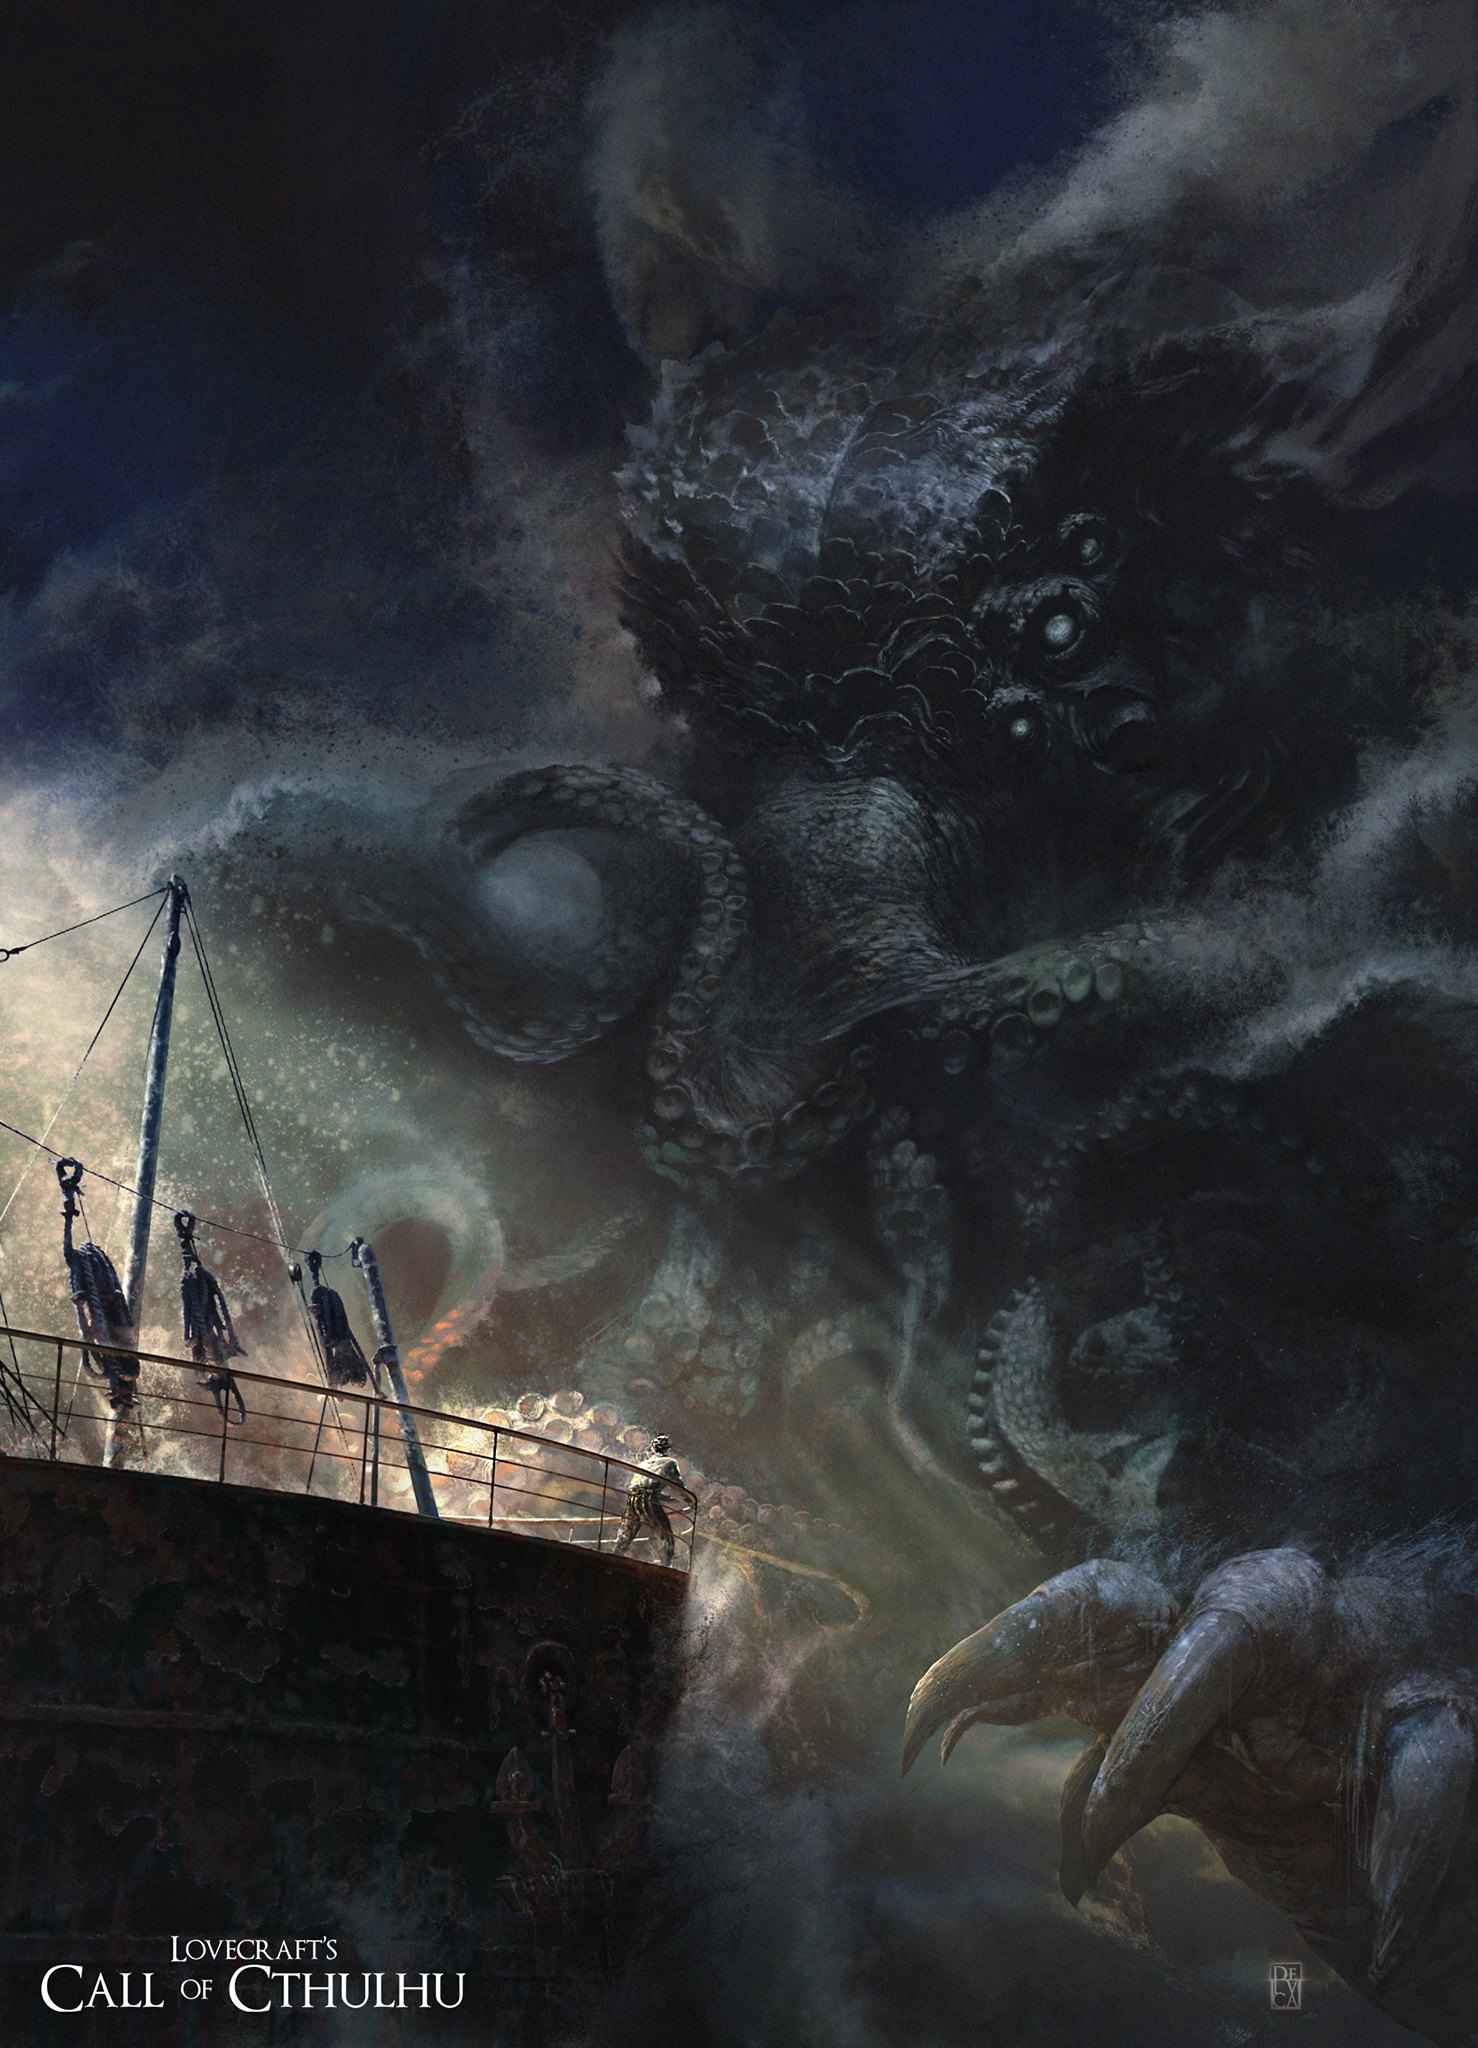 Lovecraft's Call of Cthuluh